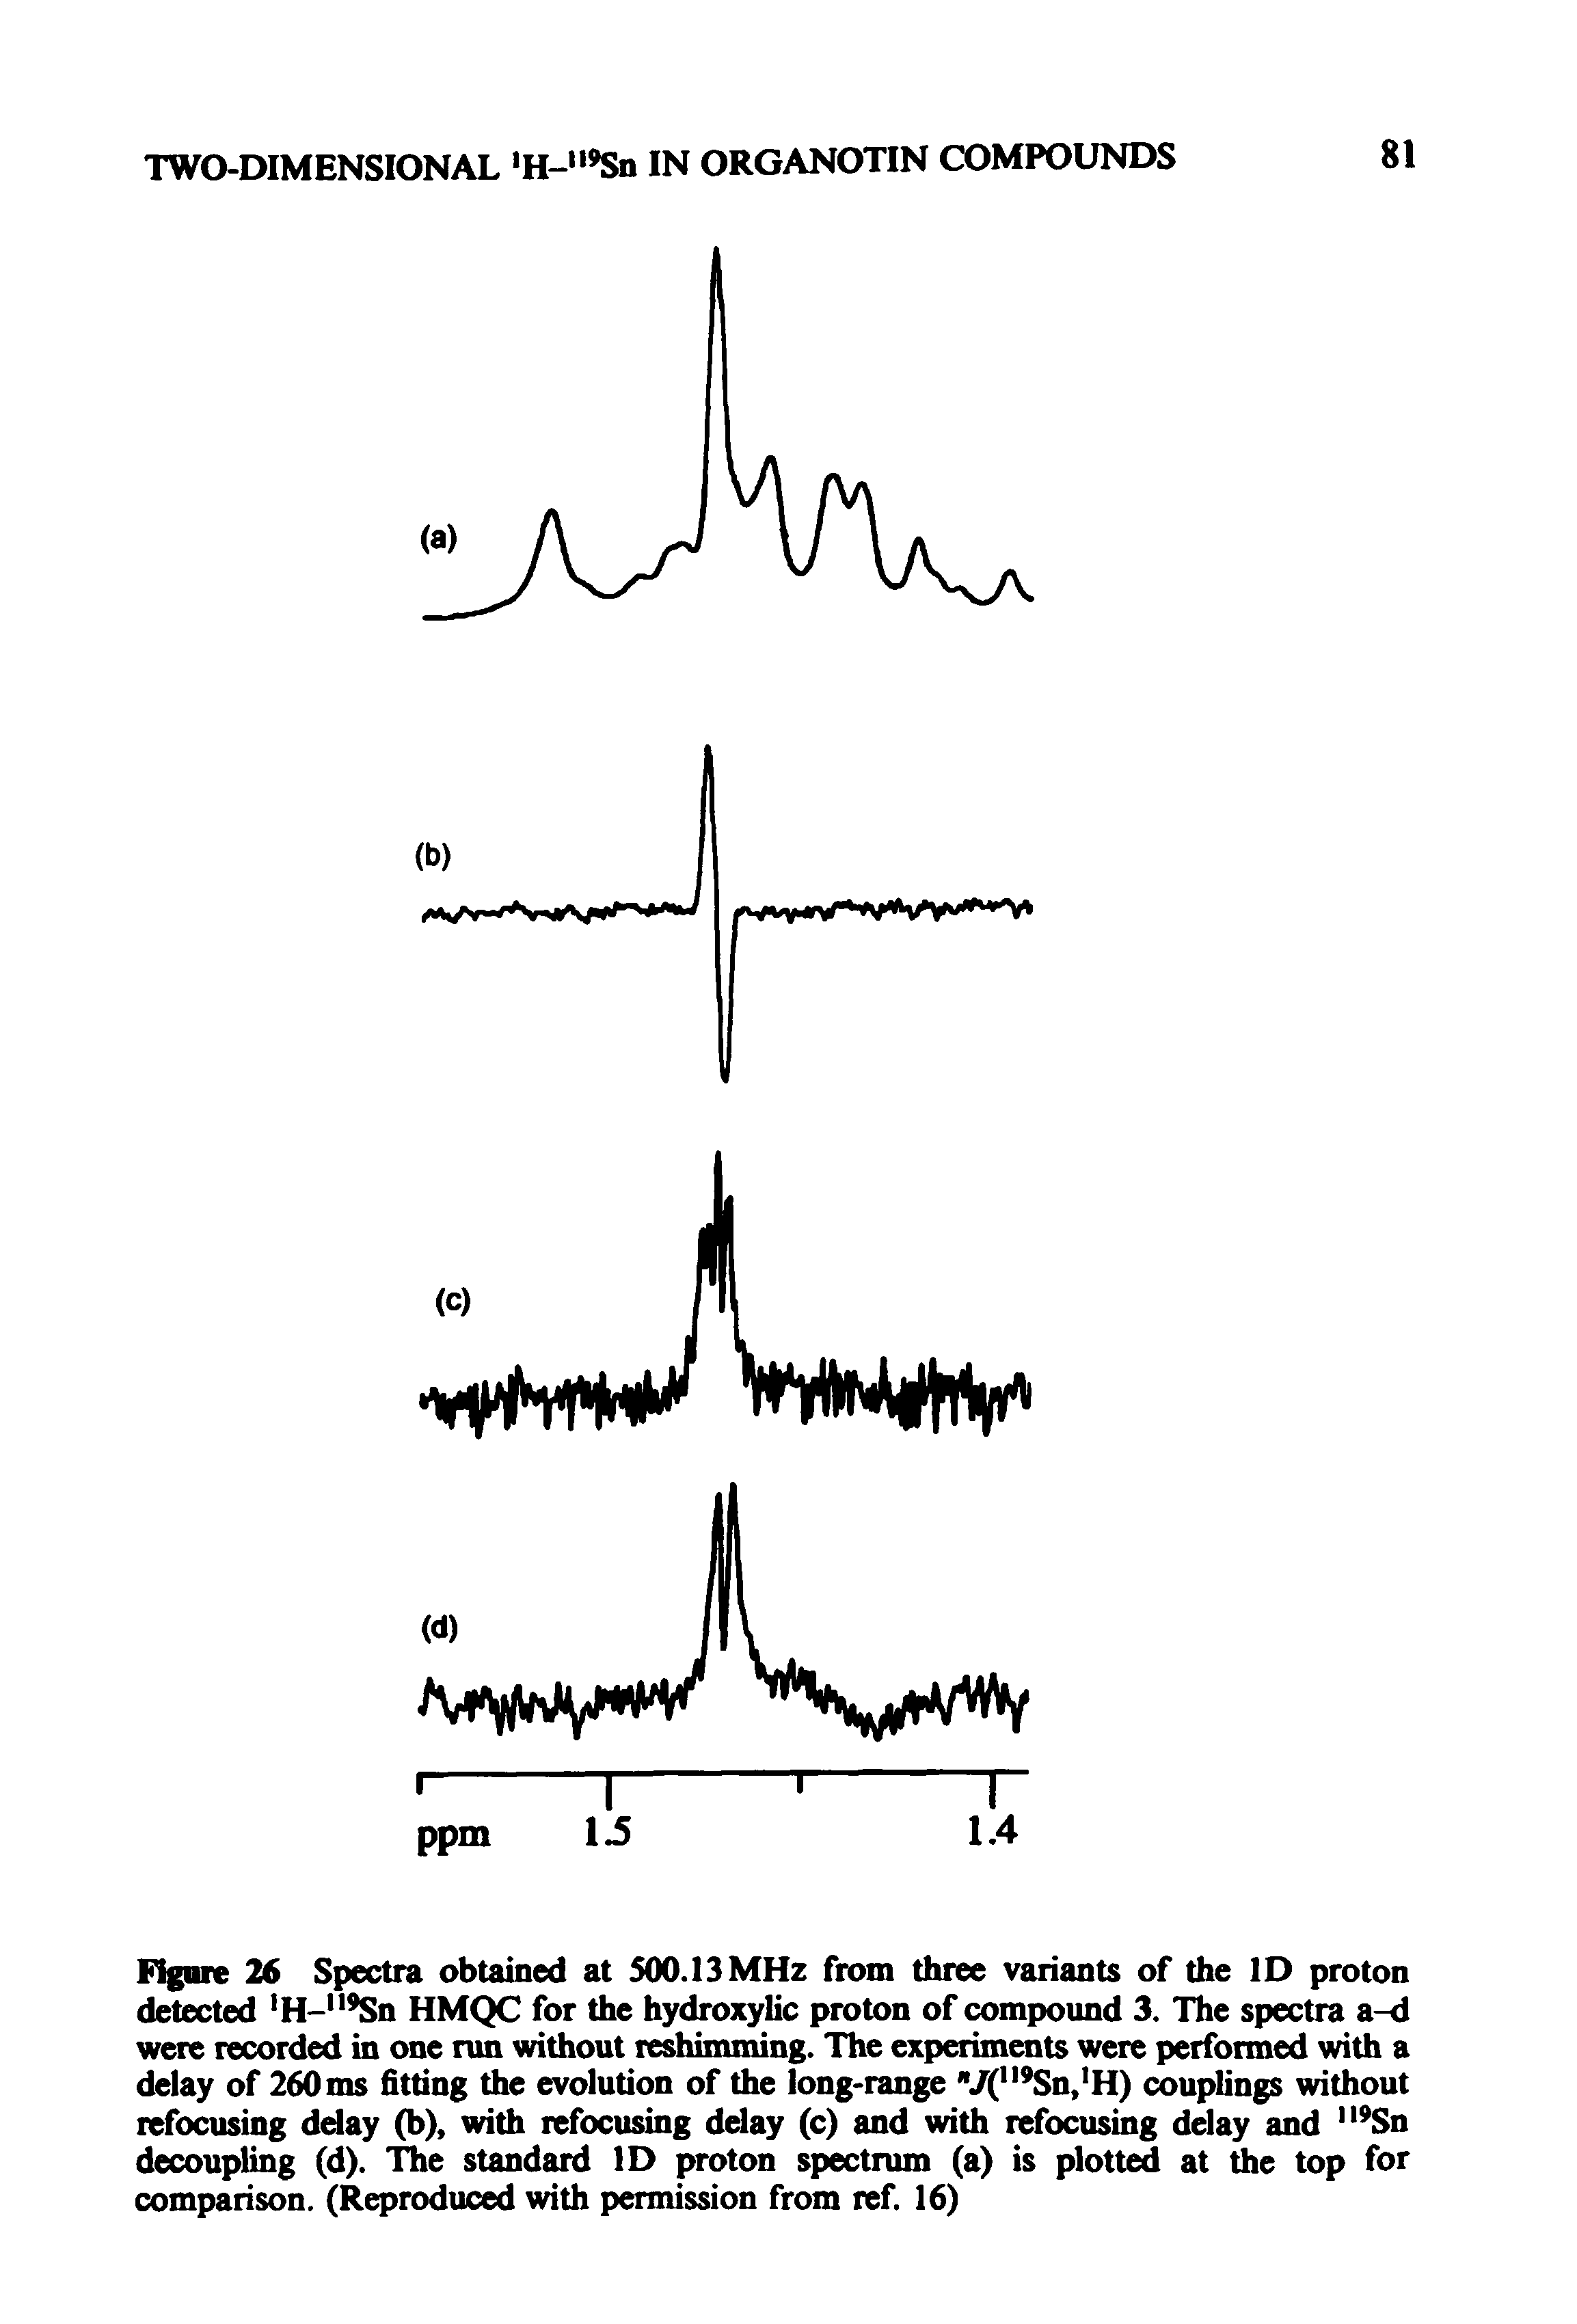 Figure 26 Spectra obtained at 500.13 MHz from three variants of the ID proton detected H- Sn HMQC for the hydroxylic proton of compound 3. The spectra a-d were recorded in one run without reshimming. The experiments were performed with a delay of 260 ms fitting the evolution of the long-range V(" Sn, H) couplings without refocusing dday (b), with refocusing delay (c) and with refocusing delay and " Sn decoupling (d). The standard ID proton spectrum (a) is plotted at the top for comparison. (Reproduced with permission from ref. 16)...